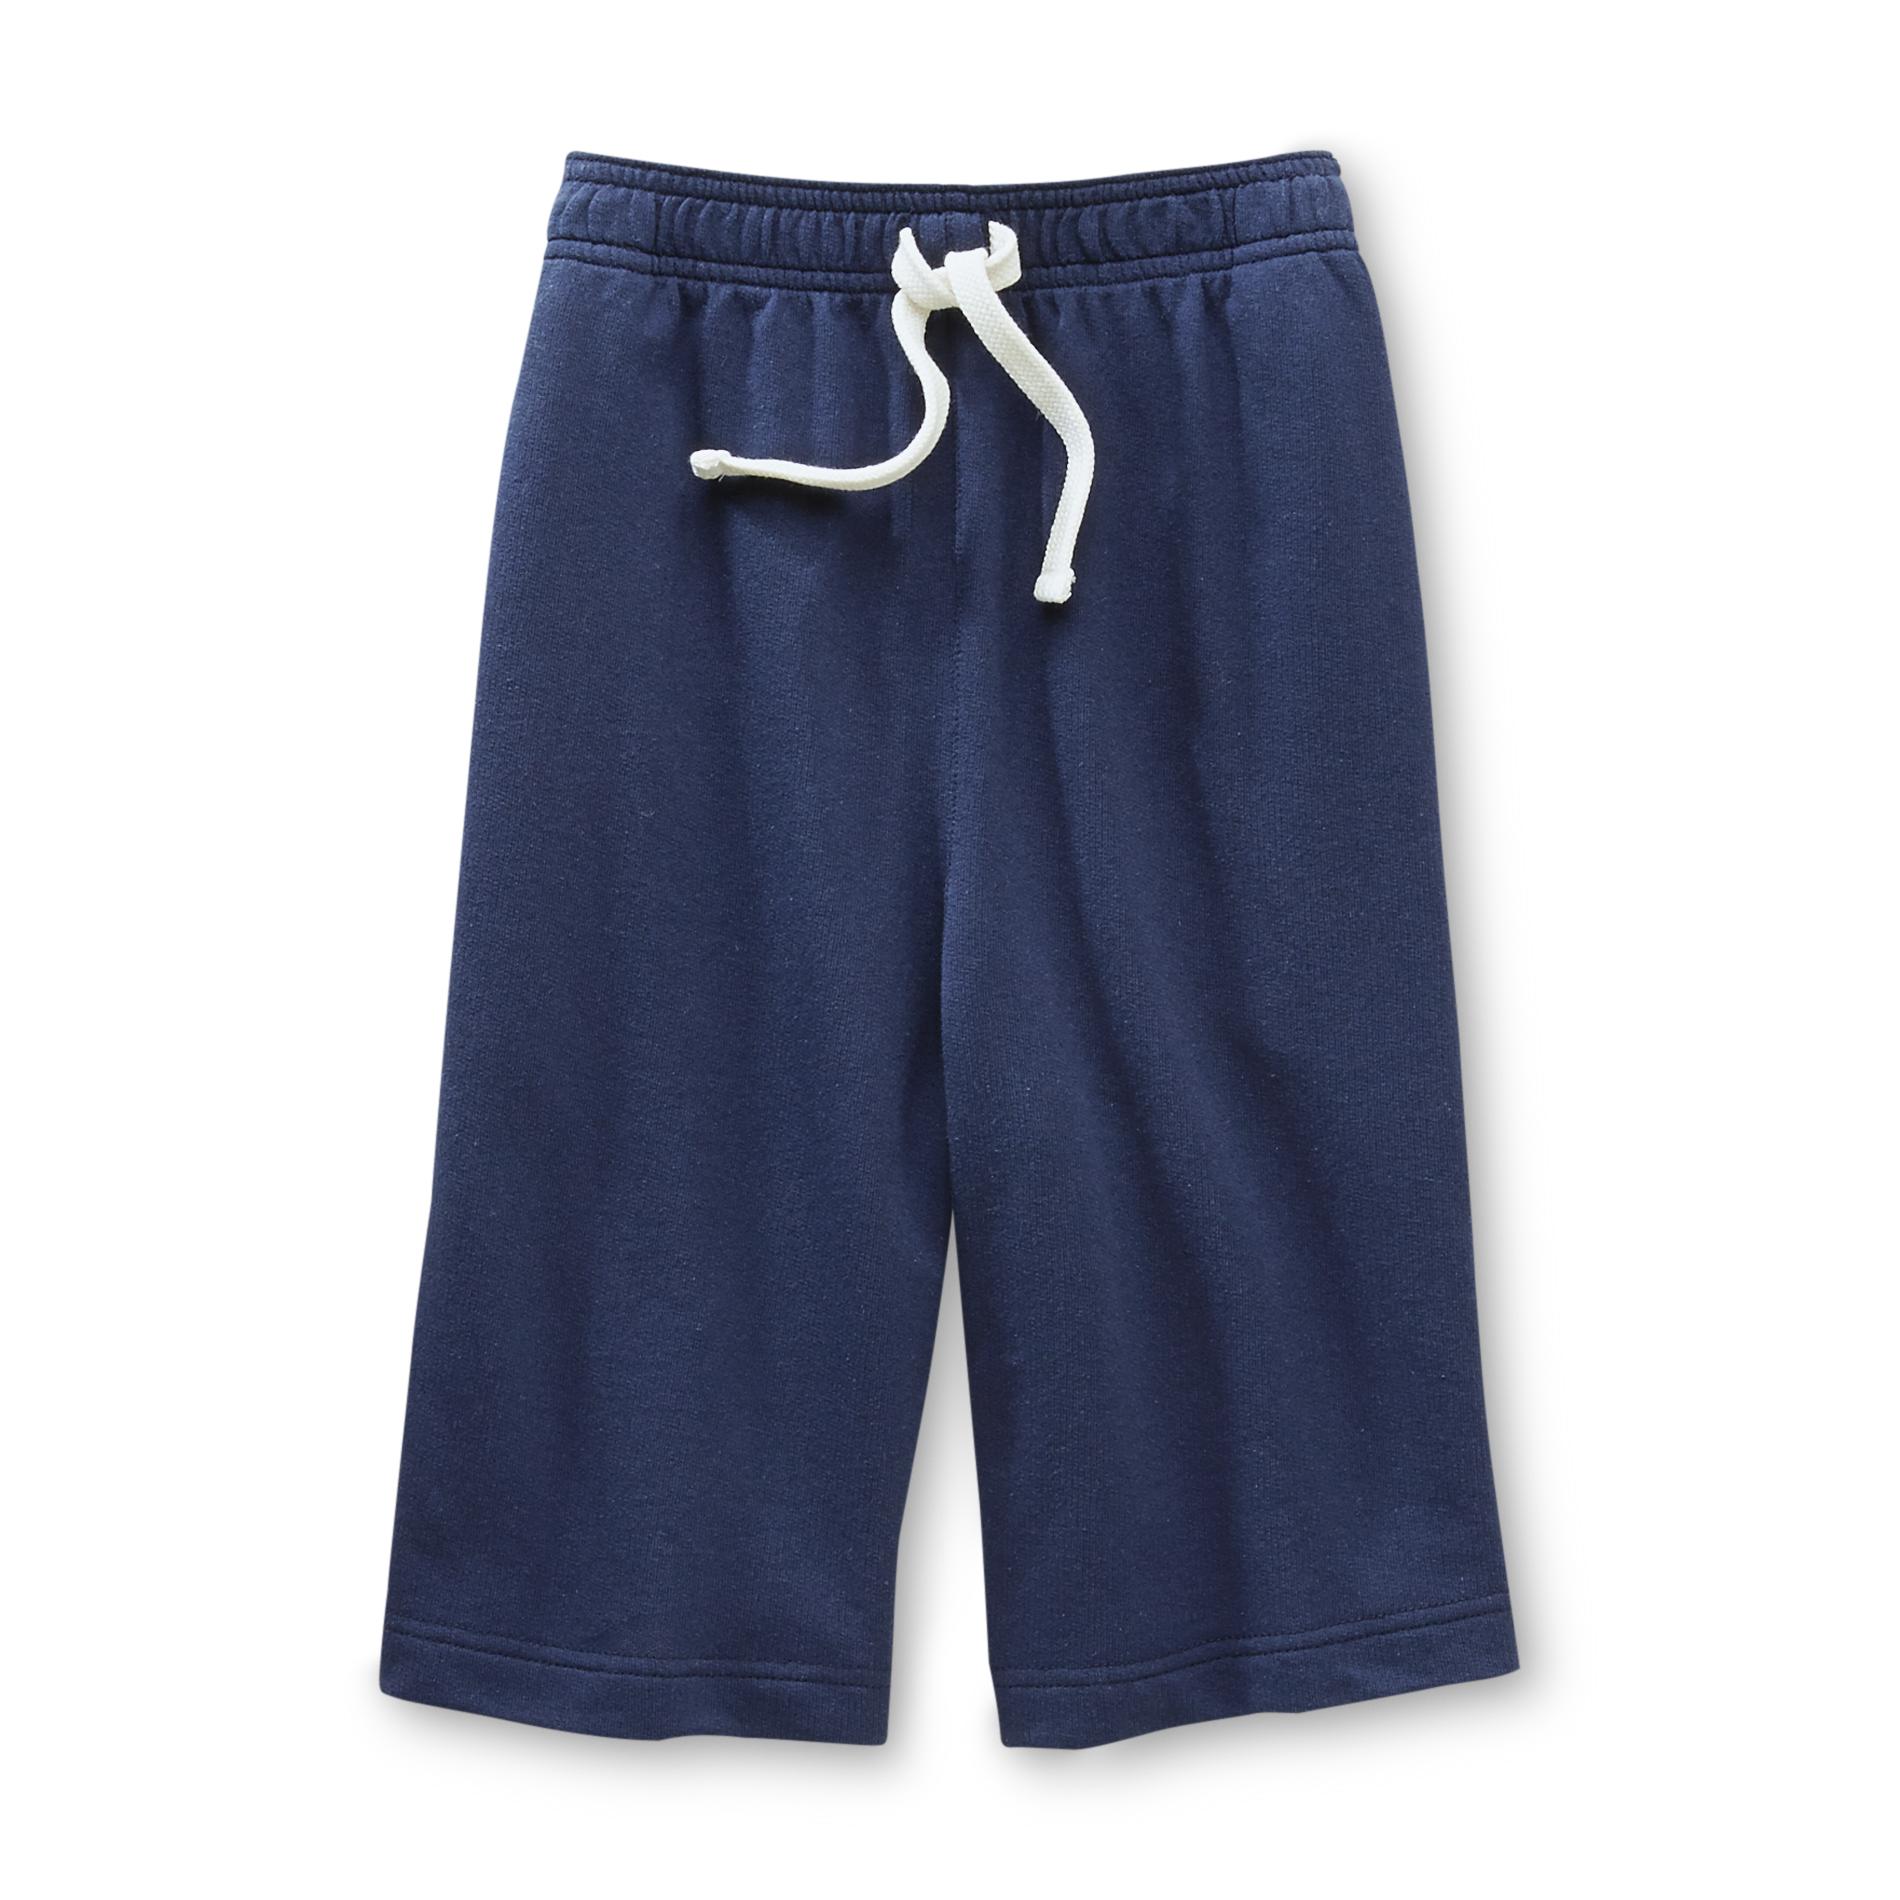 Basic Editions Boy's French Terry Shorts